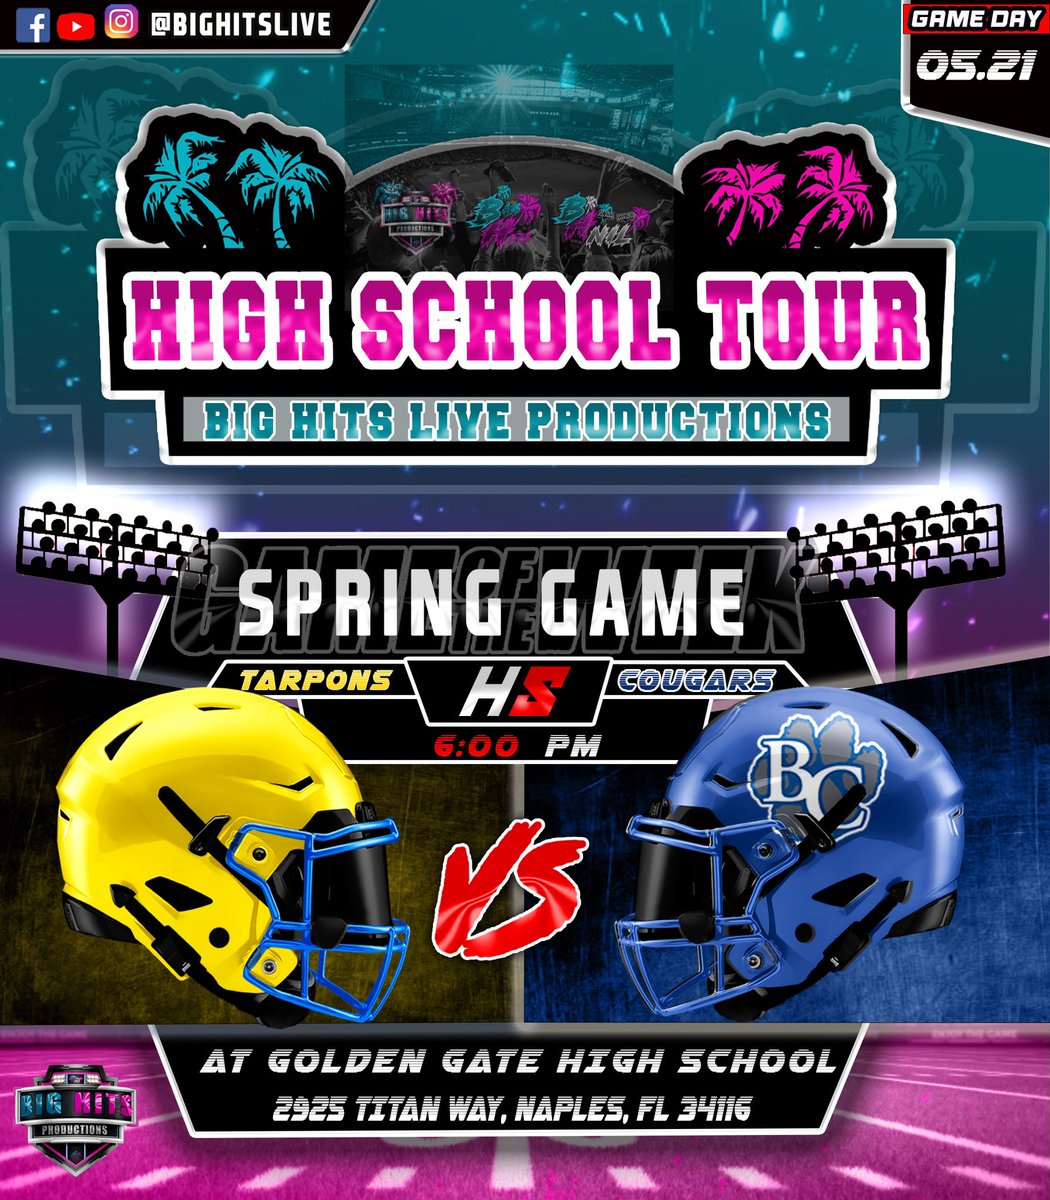 Will be in Naples tomorrow covering this game fighting tarpons vs Barron Collier cougars should be a exciting one - - @FlaHSFootball @CenFLAPreps @fbscout_florida @larryblustein @DanLaForestFB @jd_rodriguez__ @cityhopedealer @H2_Recruiting @RealNews102